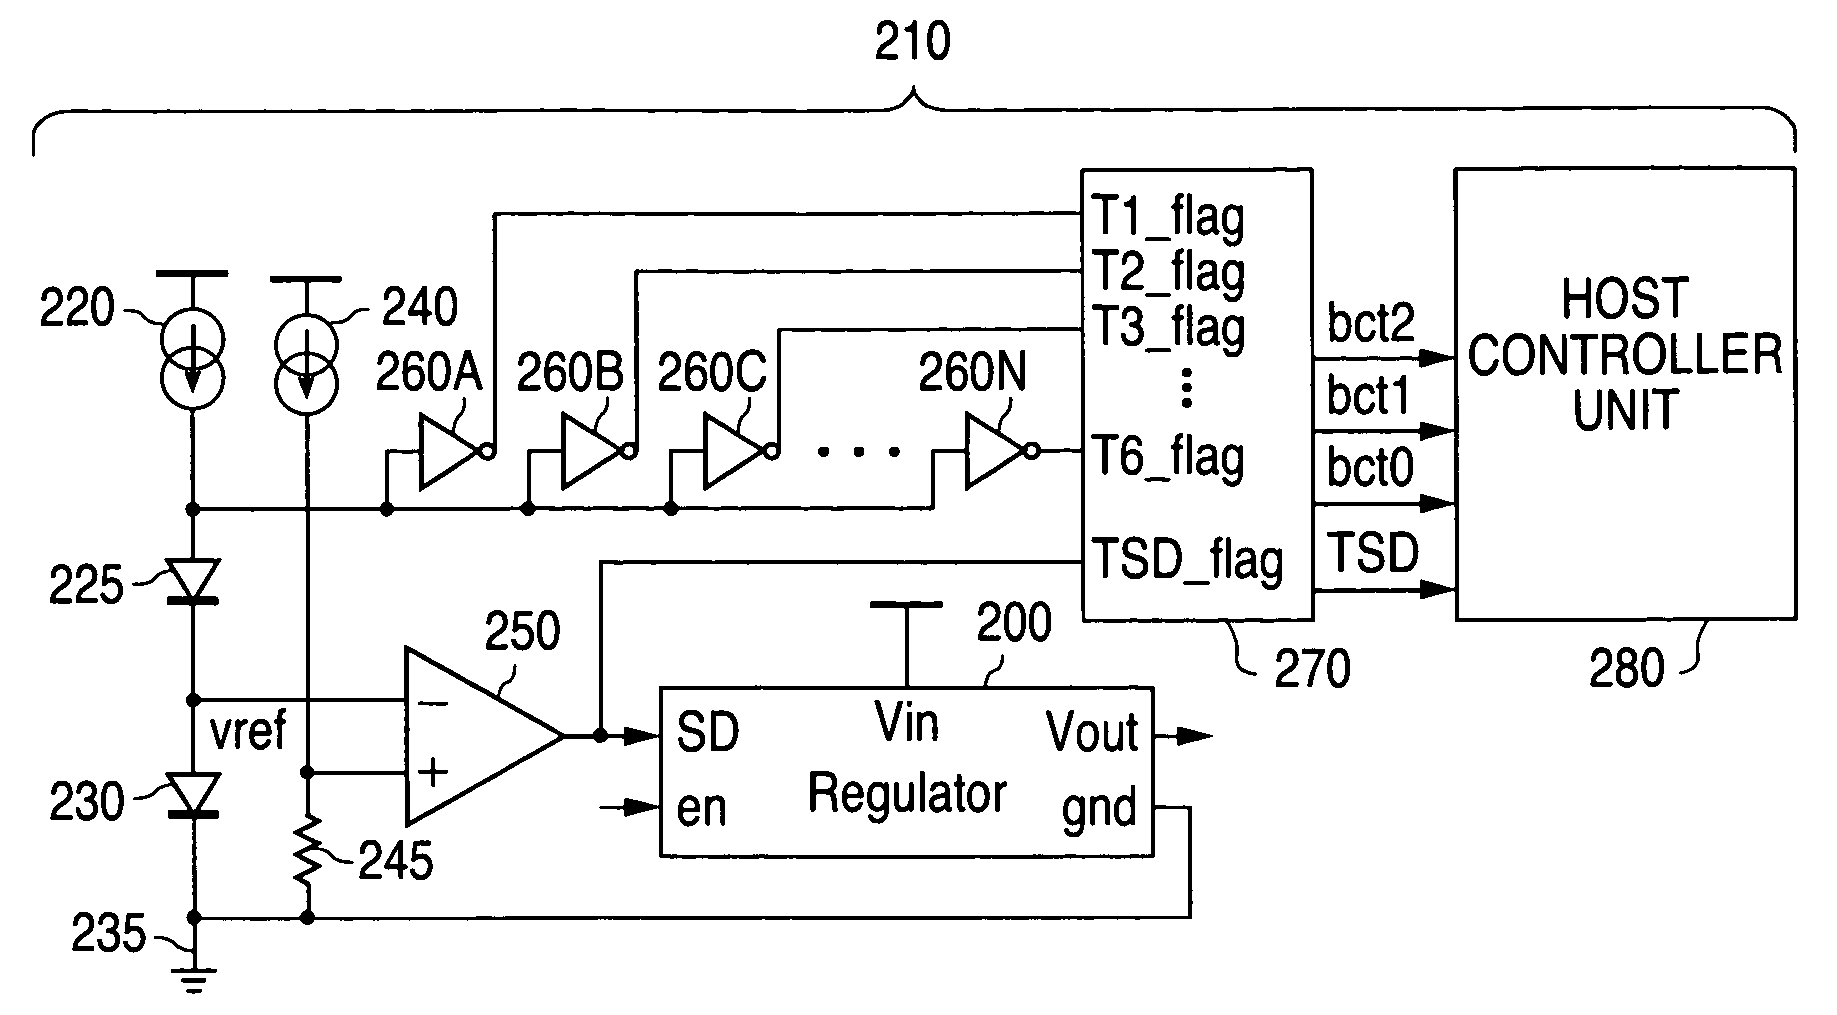 System and method for providing a thermal shutdown circuit with temperature warning flags